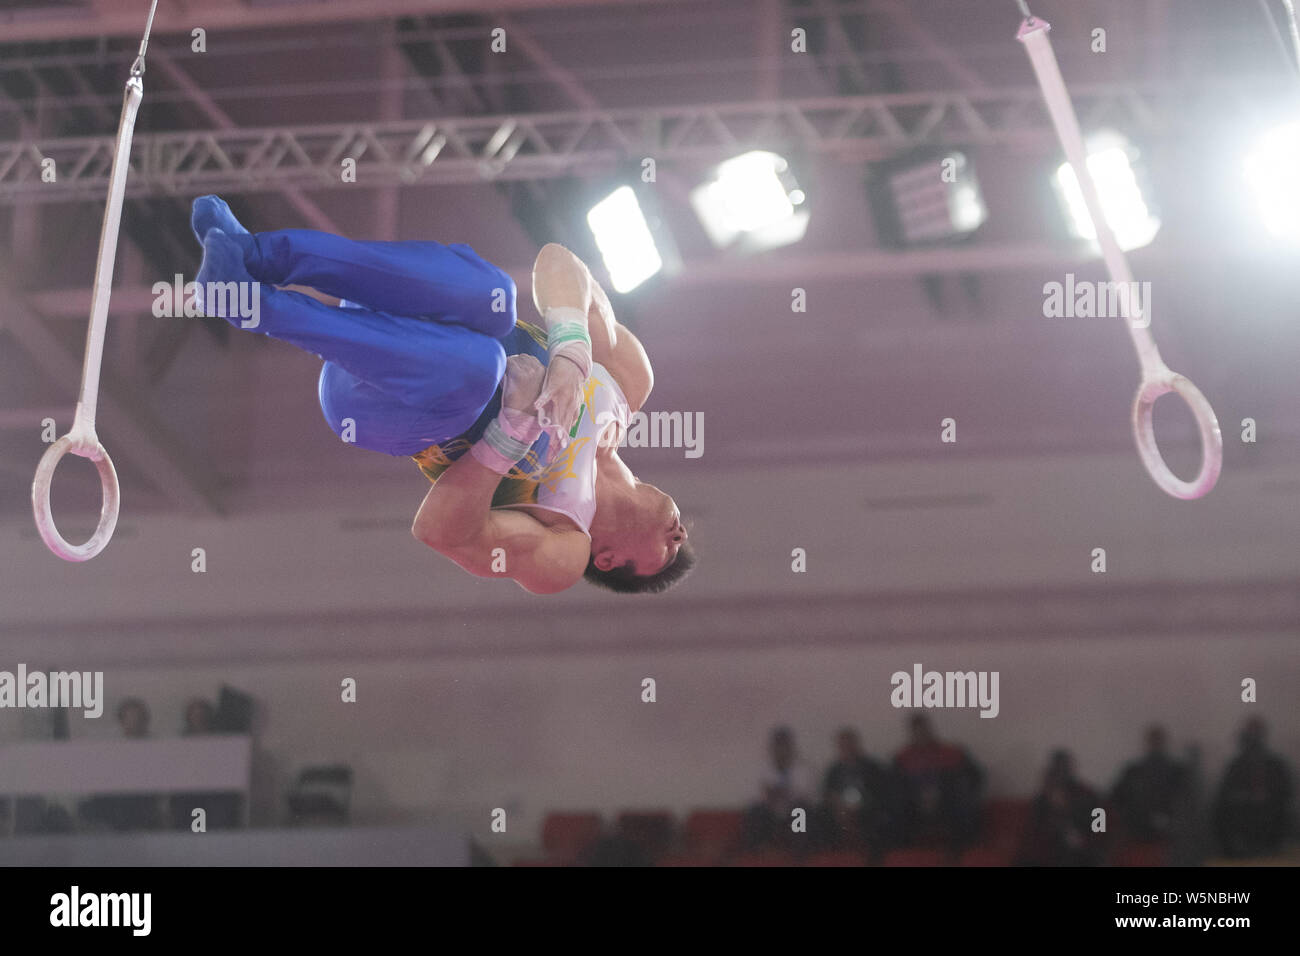 Lima, Peru. 28th July, 2019. Arthur Mariano (#78) of Brazil performs on the still rings during the Pan American Games Artistic Gymnastics, Men's Team Qualification and Final at Polideportivo Villa el Salvador in Lima, Peru. Daniel Lea/CSM/Alamy Live News Stock Photo